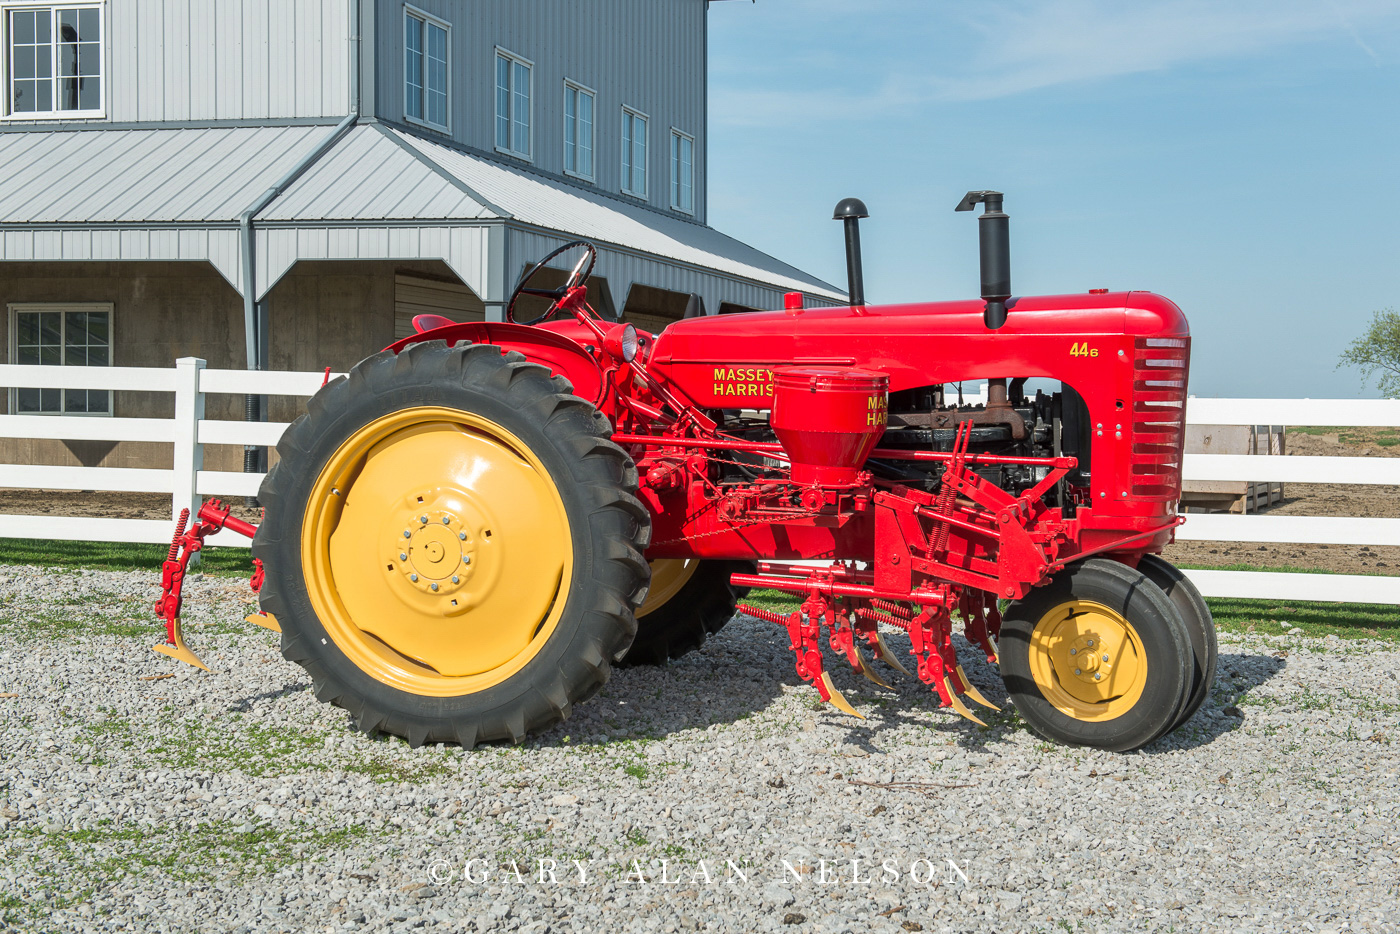 1947-57 Massey-Harris 44-6 with cultivator/planter.